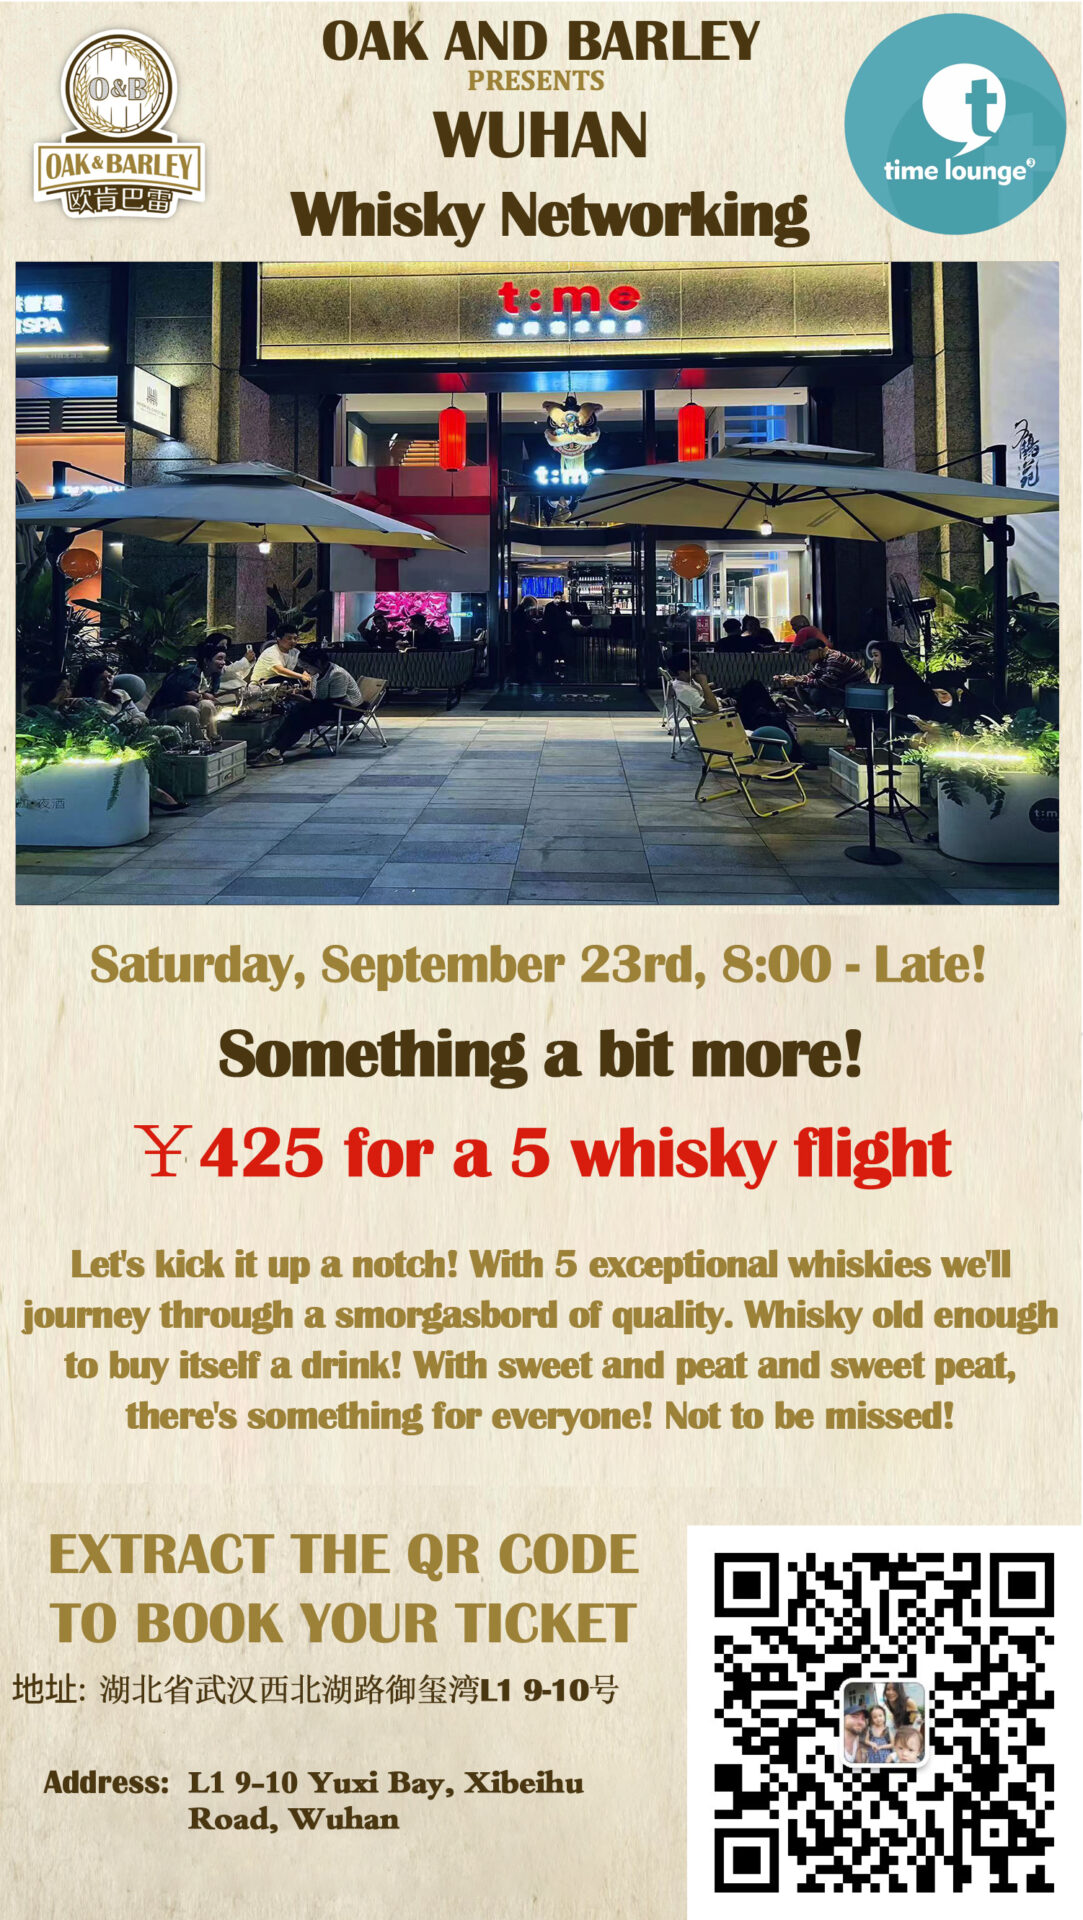 Oak and Barley Wuhan presents Wuhan Whisky Networking